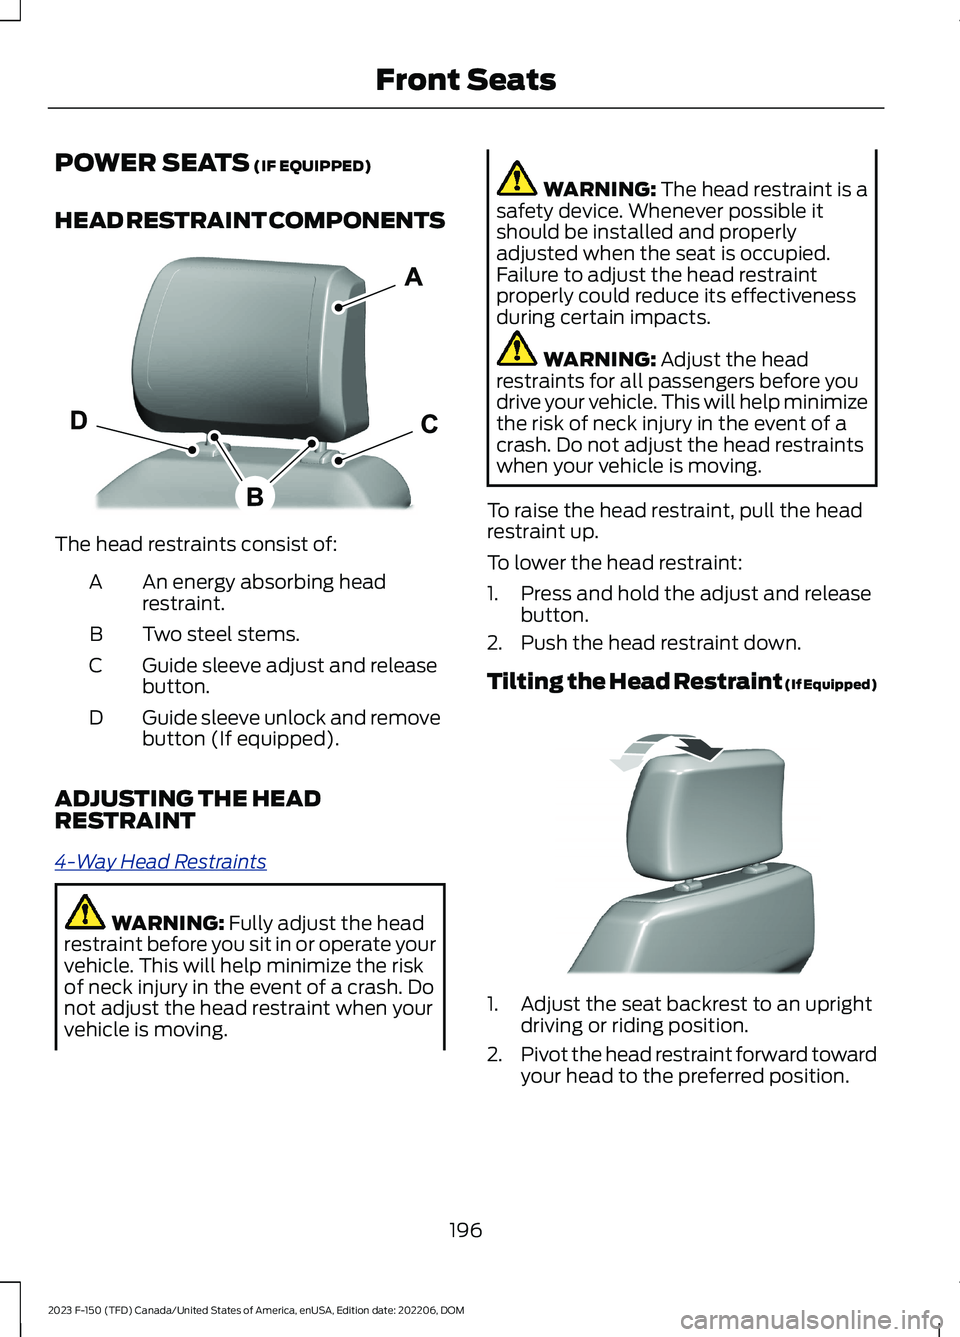 FORD F150 2023  Owners Manual POWER SEATS (IF EQUIPPED)
HEAD RESTRAINT COMPONENTS
The head restraints consist of:
An energy absorbing headrestraint.A
Two steel stems.B
Guide sleeve adjust and releasebutton.C
Guide sleeve unlock an